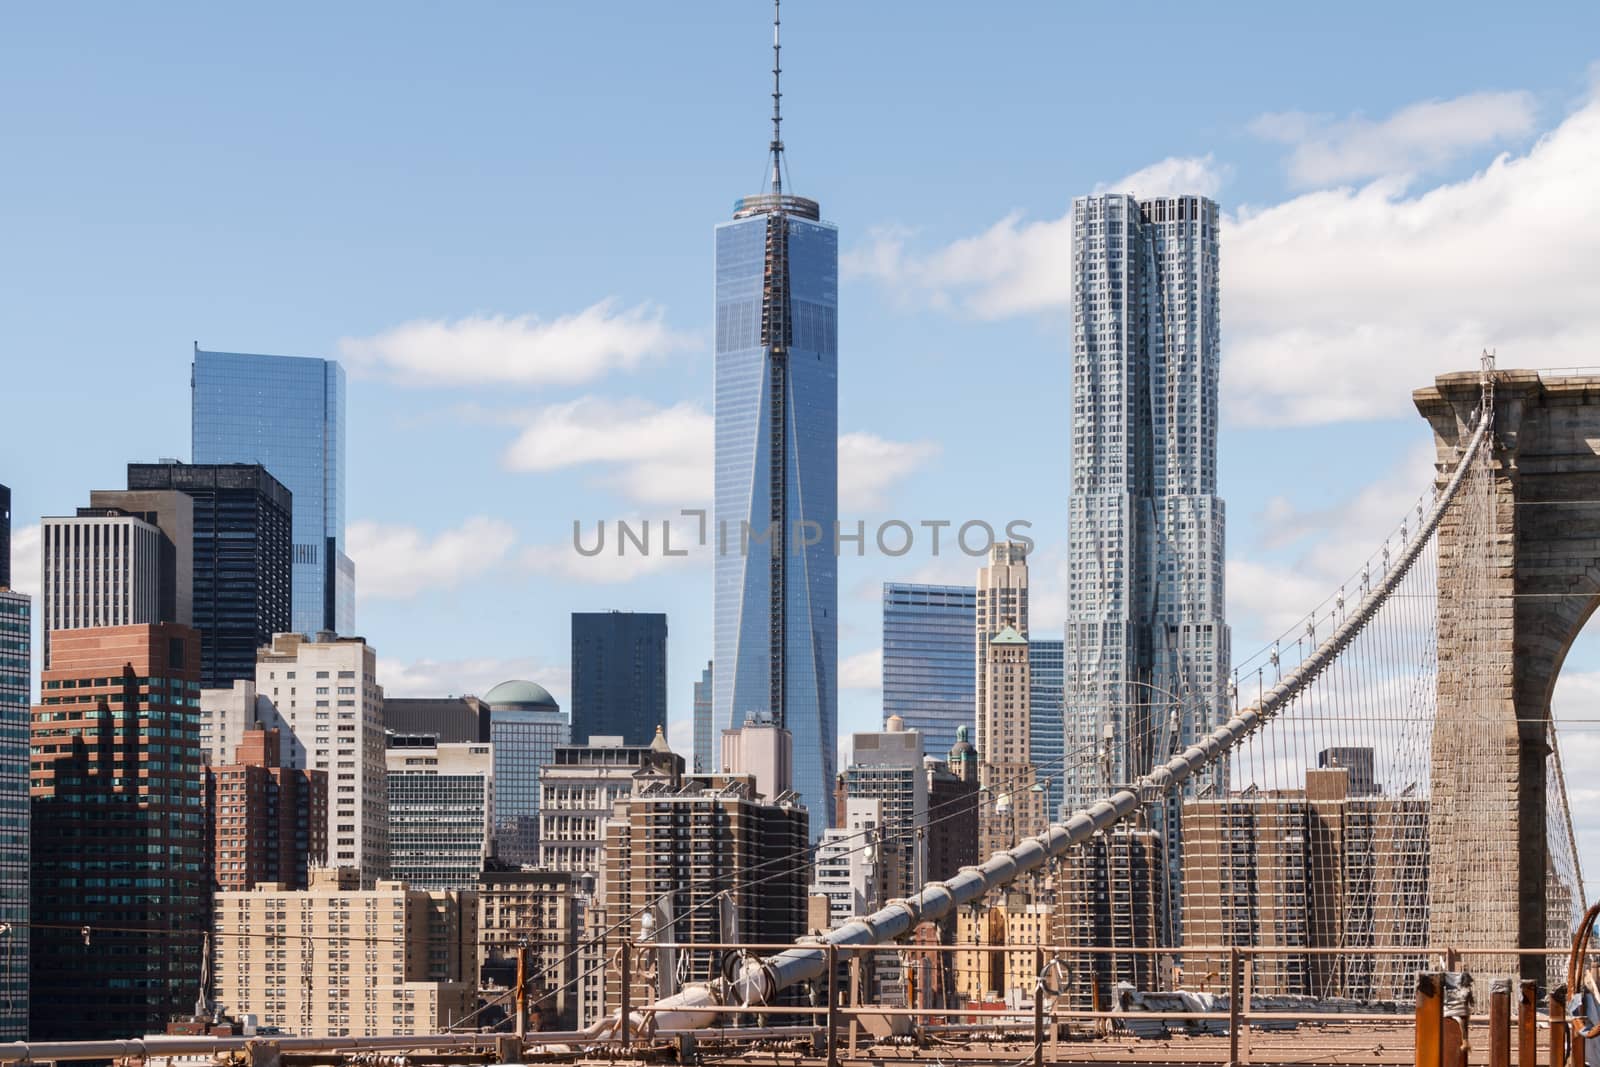 The view of the skyscrapers of lower Manhattan, New York, as seen from the Brooklyn Bridge, being under constant construction